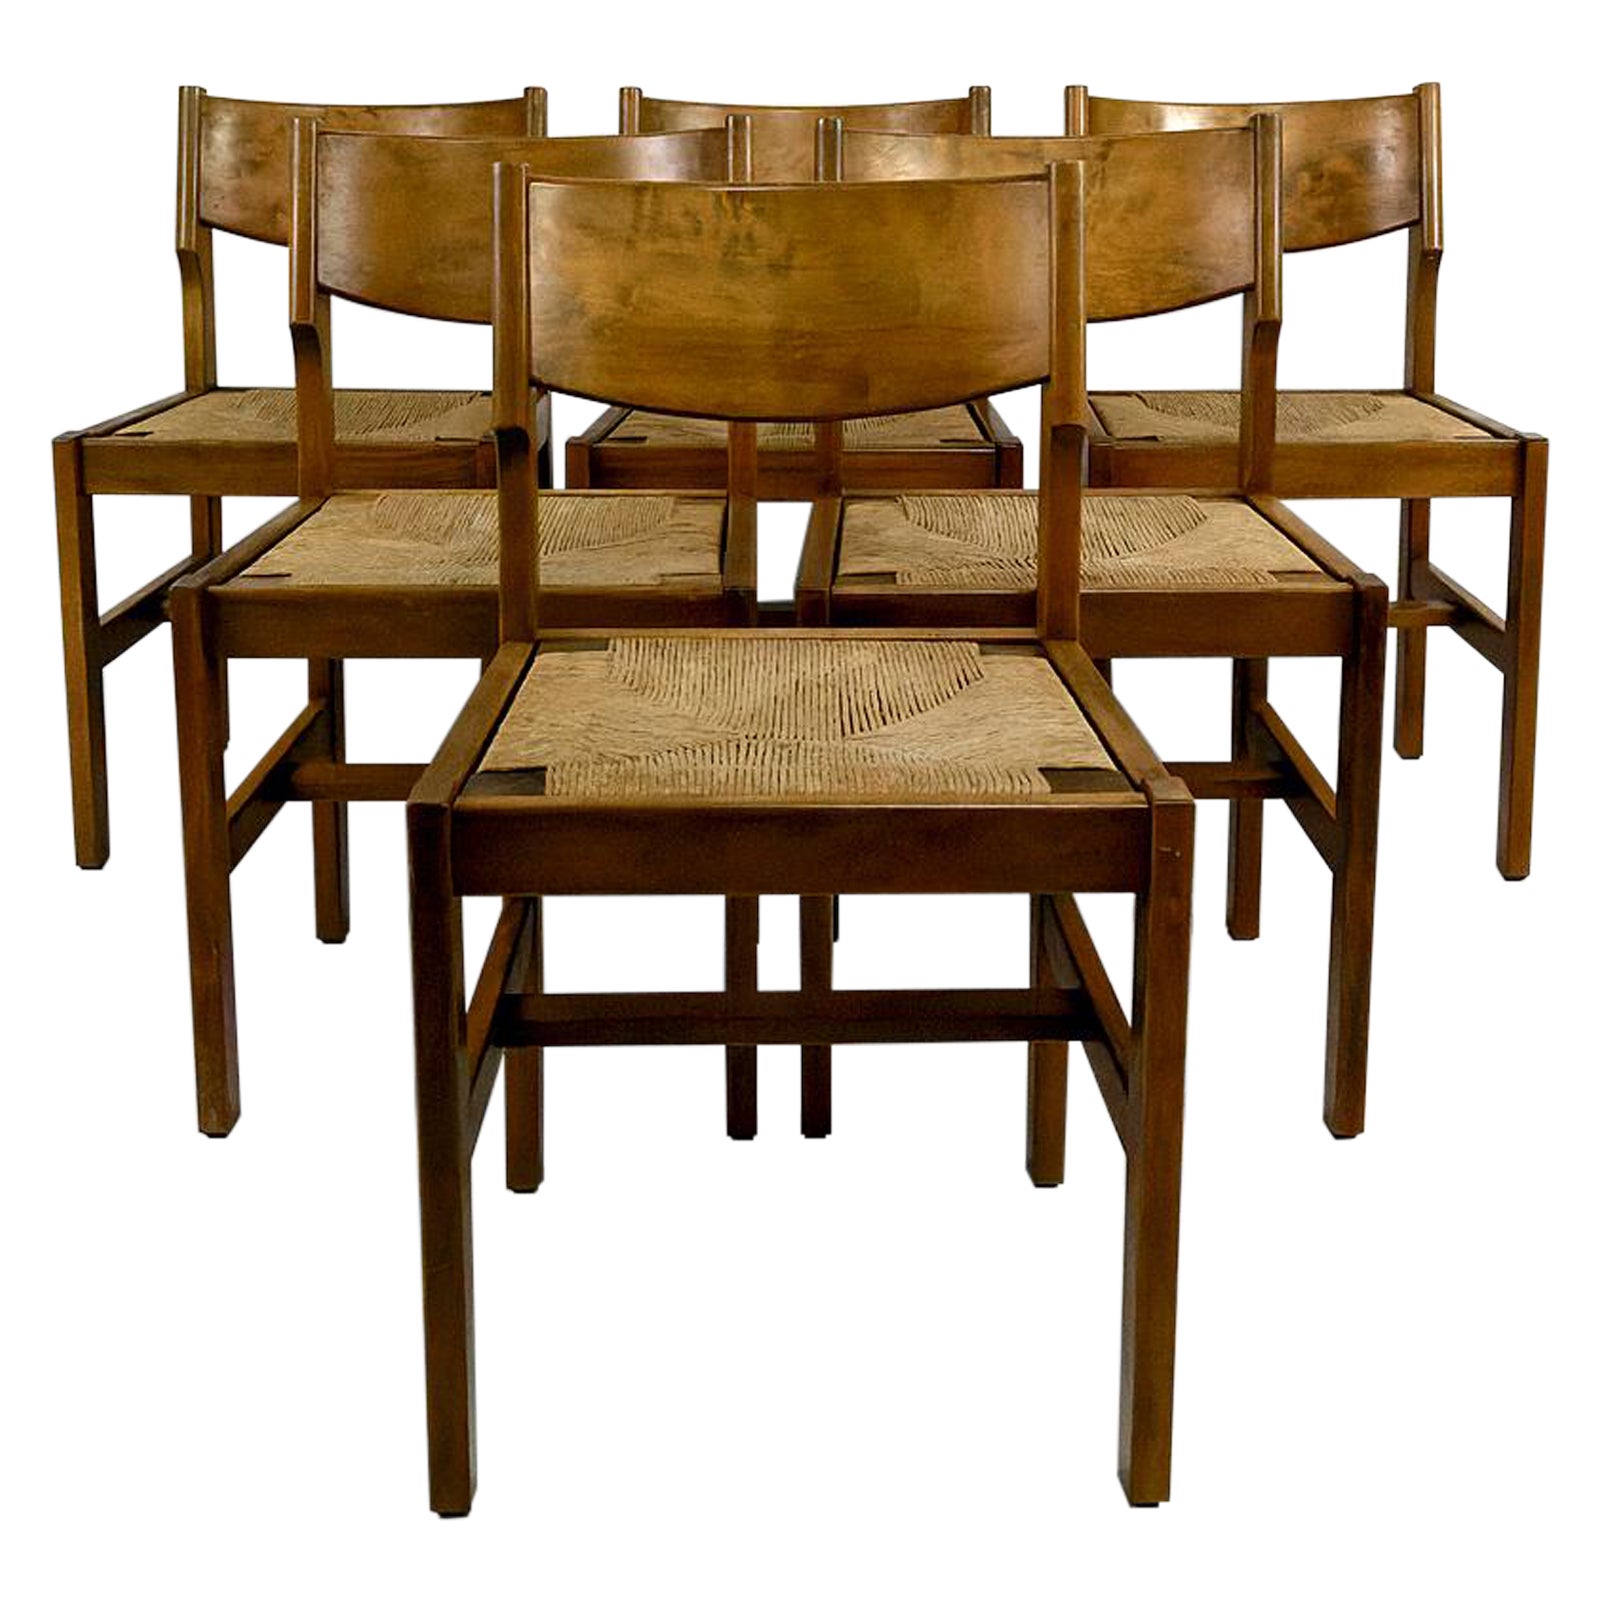 Set of 6 brutalist Elm chairs with mulched seats, Maison Regain, Circa 1960 For Sale